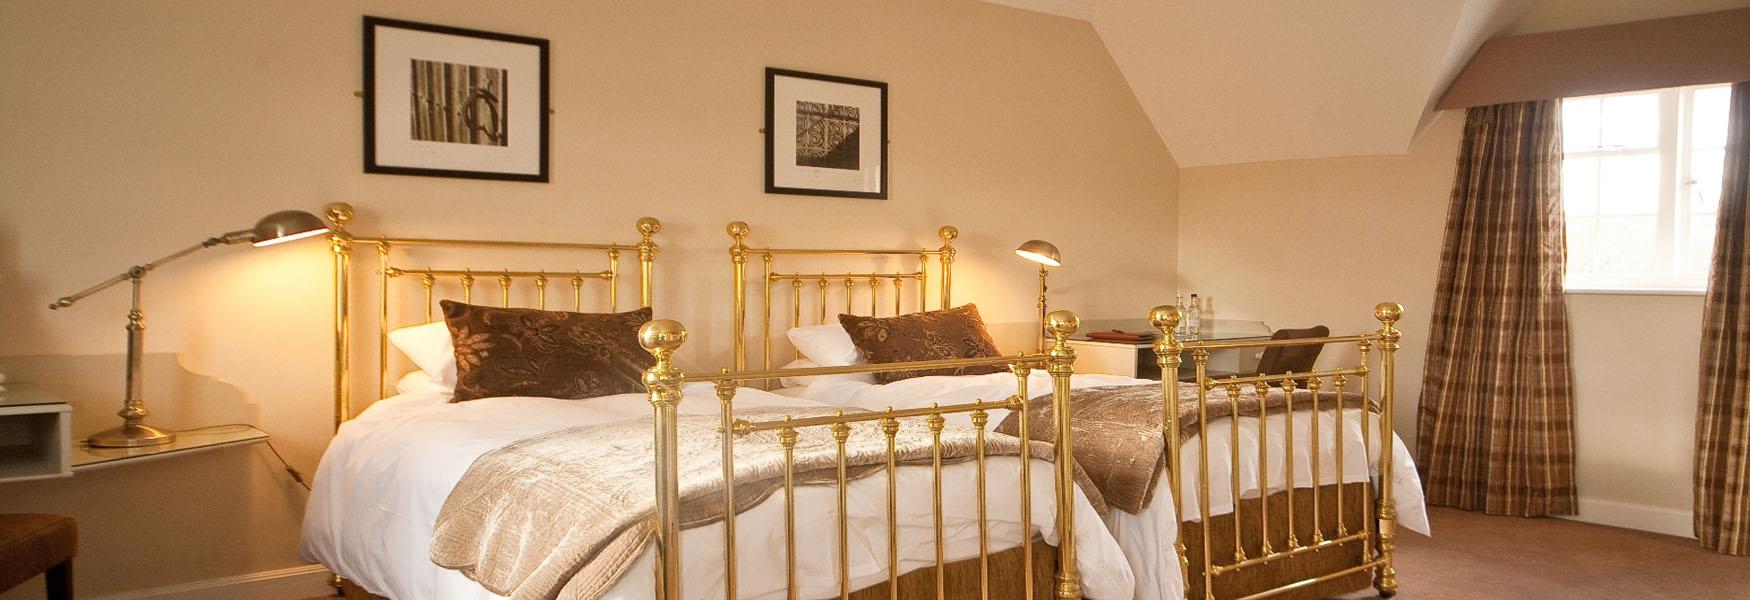 Bed and breakfast accommodation at Leeds Castle